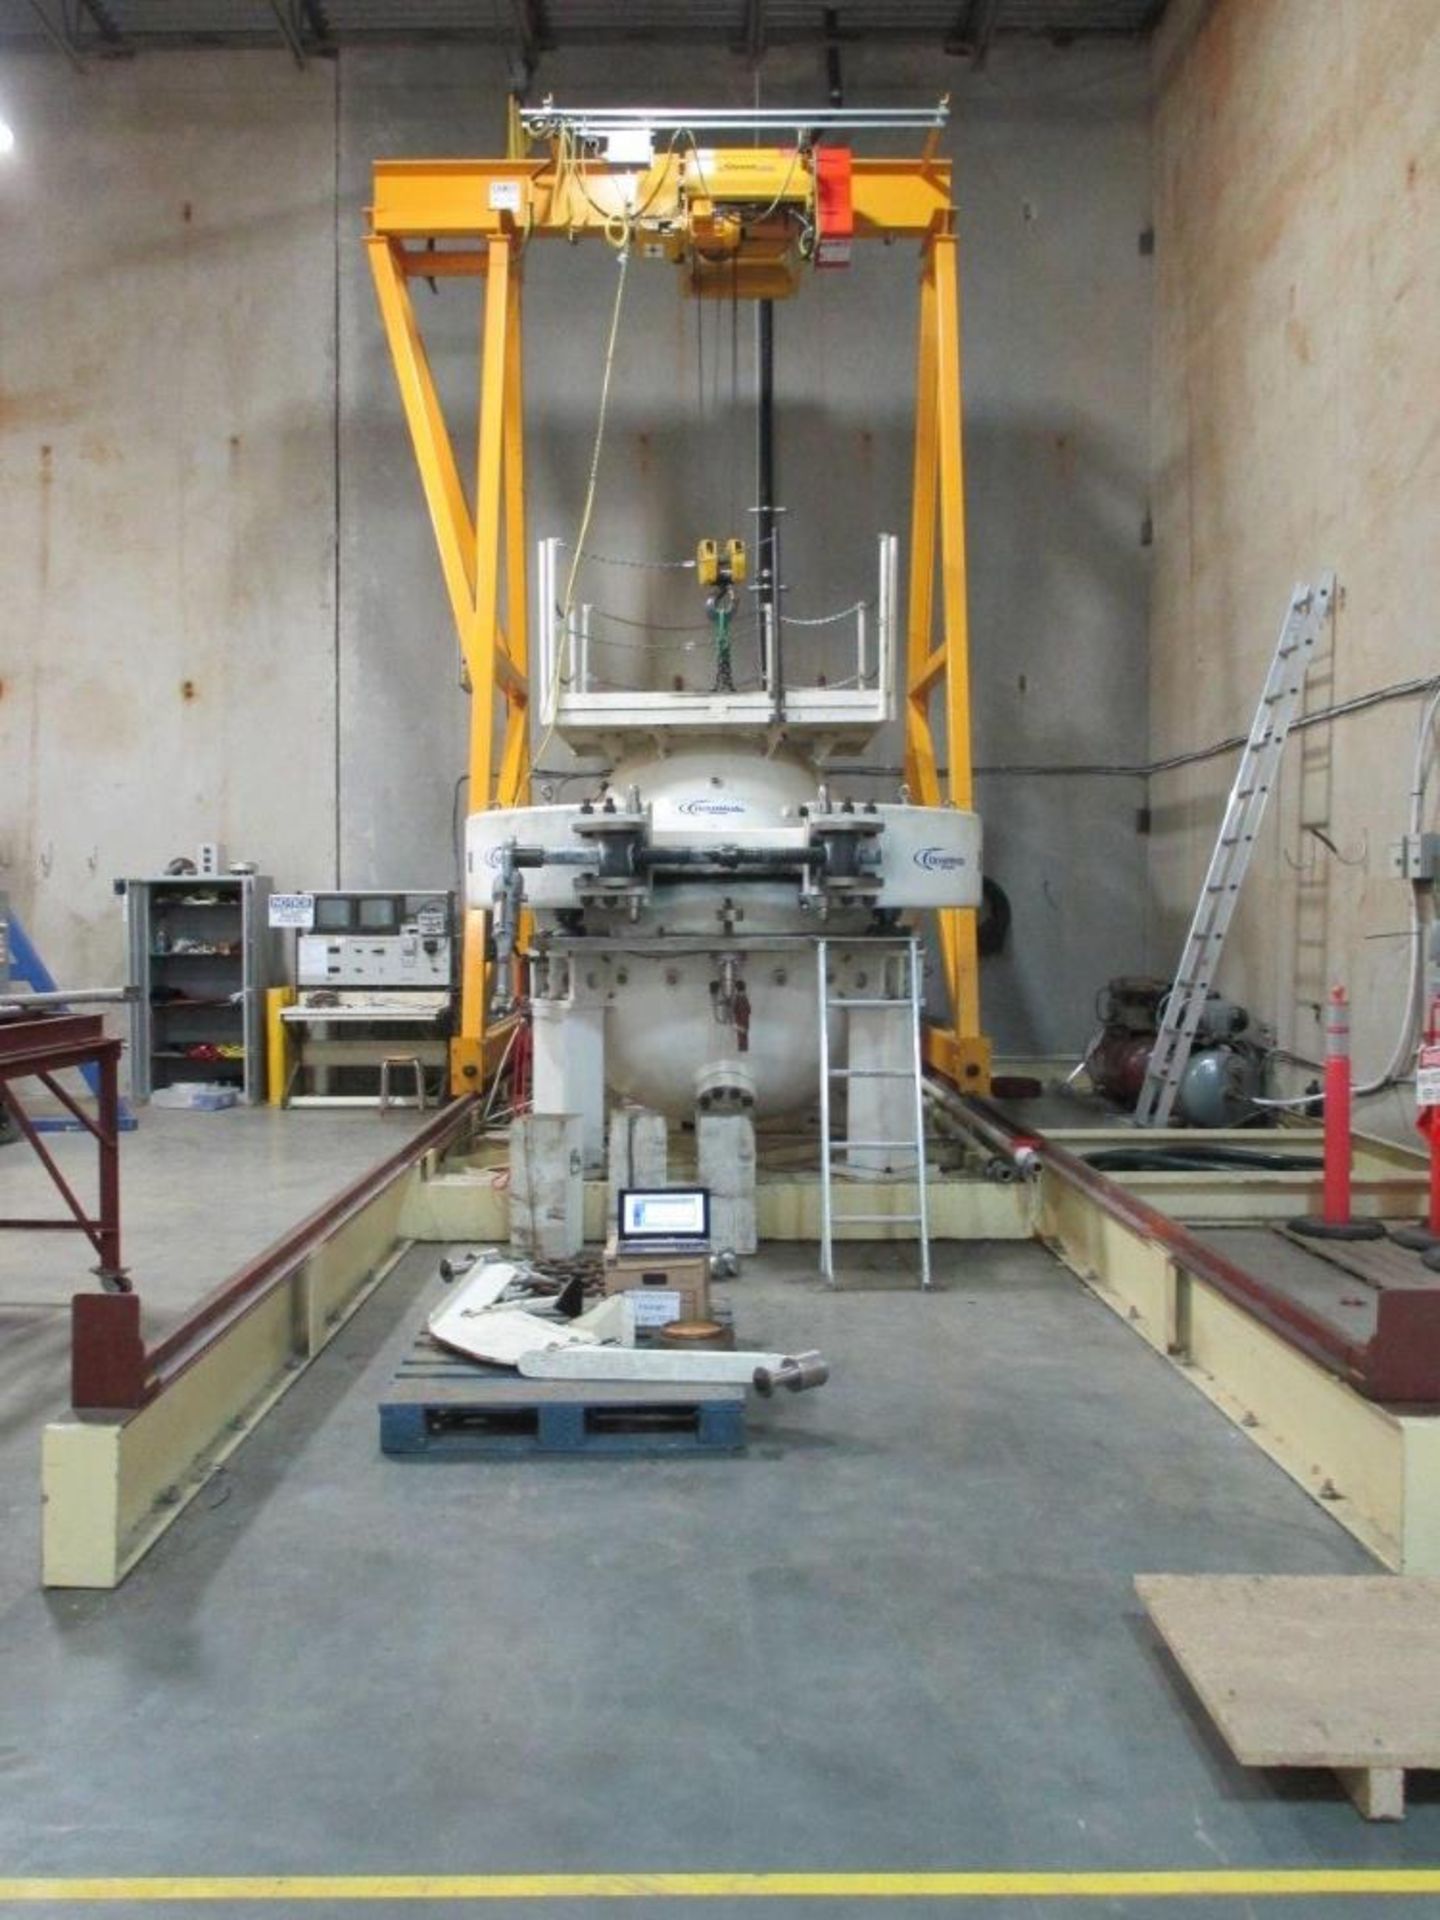 HTV System & 10ton Gantry Crane Including Controls, and parts cabinet